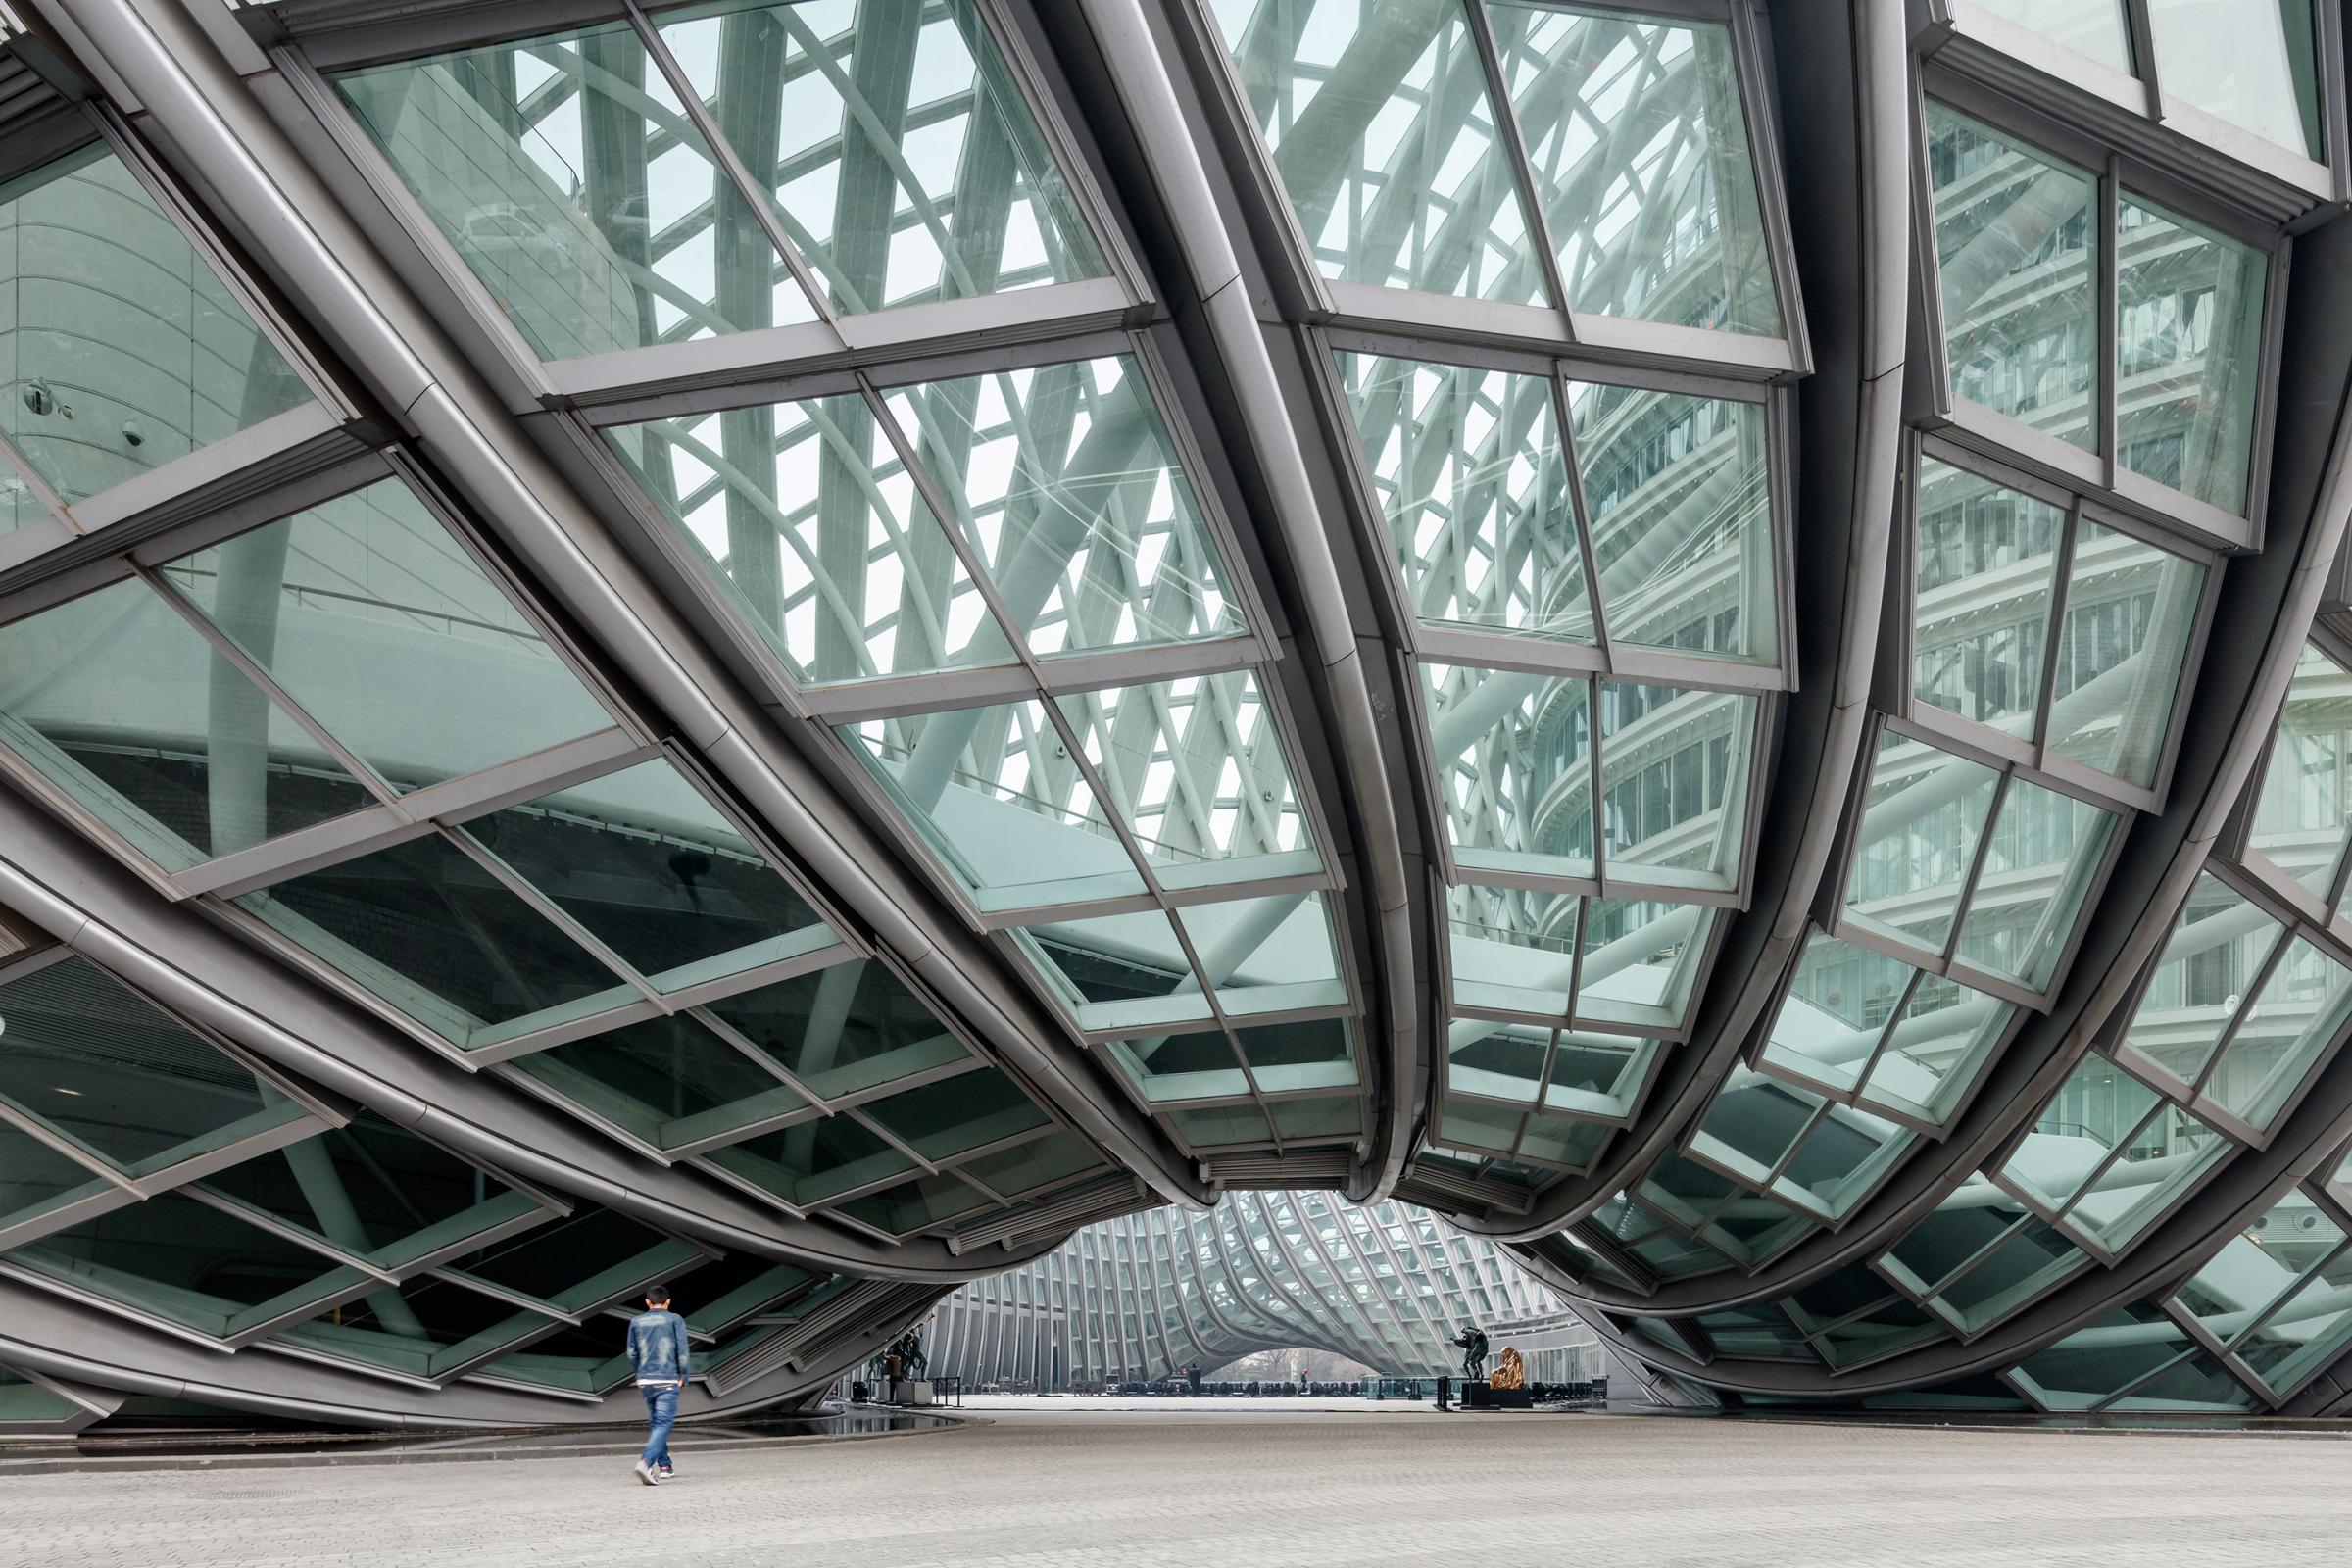 Photograph of Phoenix International Media Center, designed by BIAD UFo and located in Beijing, China